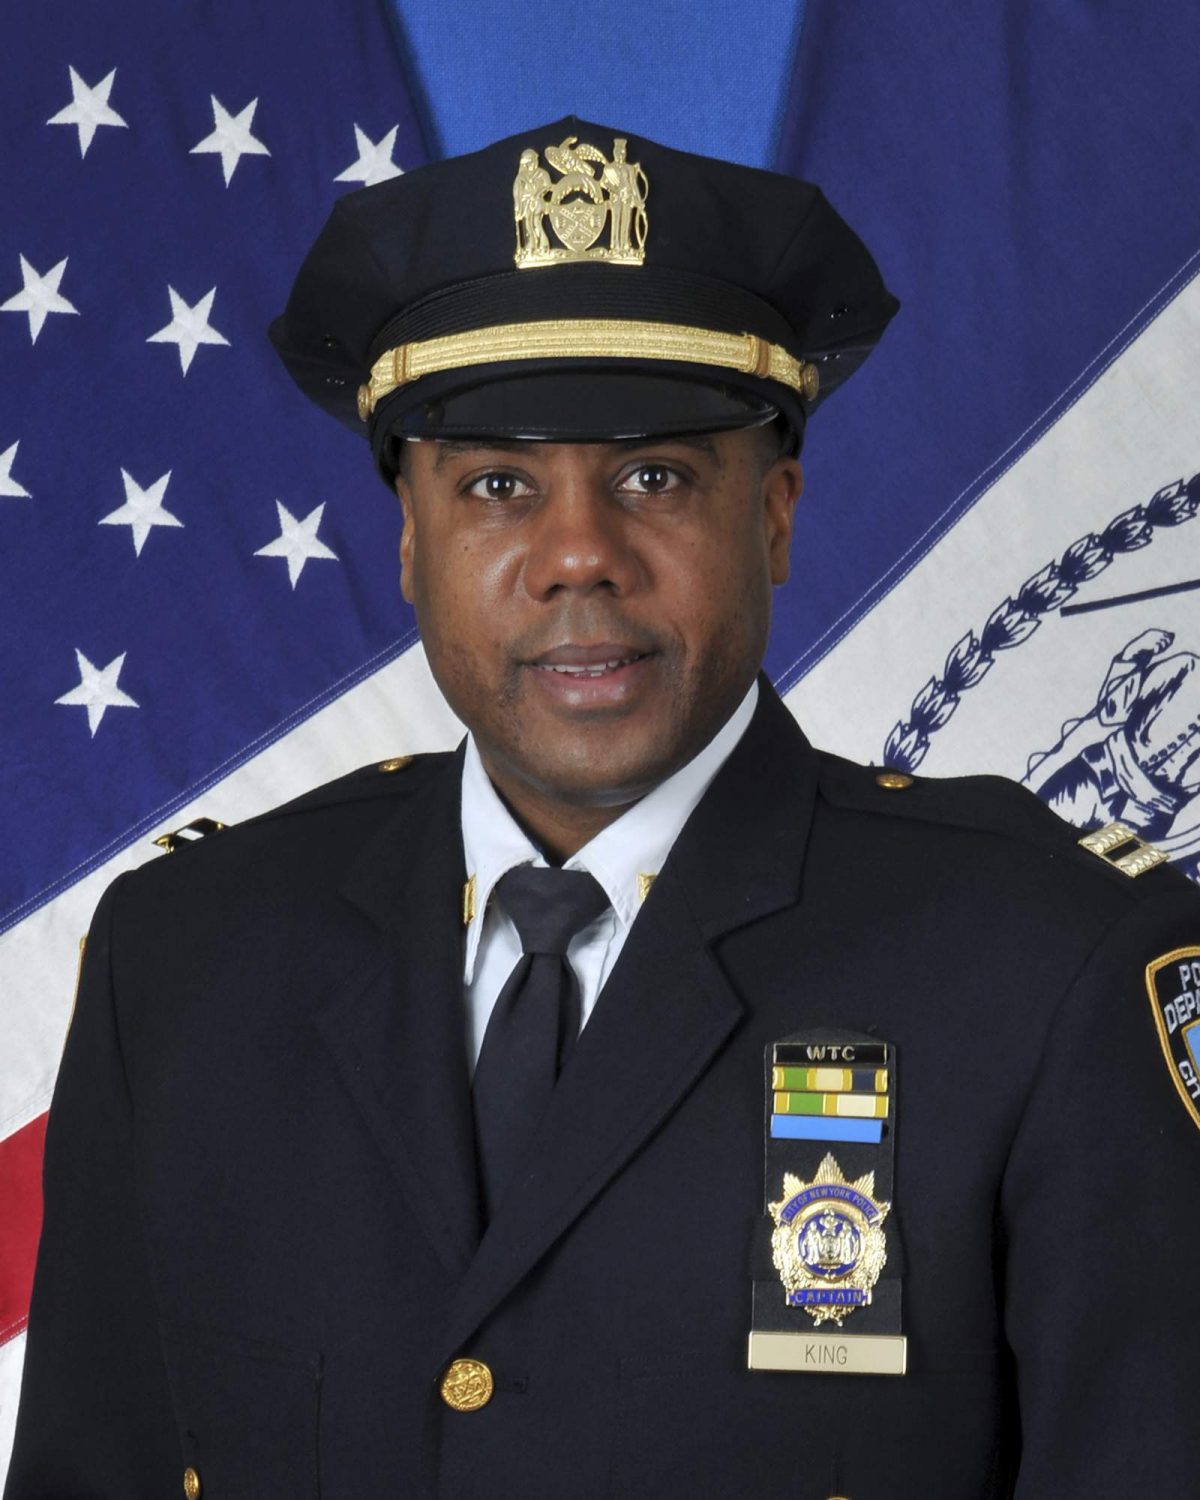 This photo, provided by the New York City Police Department, shows Deputy Inspector Michael King. The new head of New York City's sex crimes unit is not only a veteran investigator, but also a forensic nurse who has conducted the physical exams and evidence collection that are vital to solving such cases.